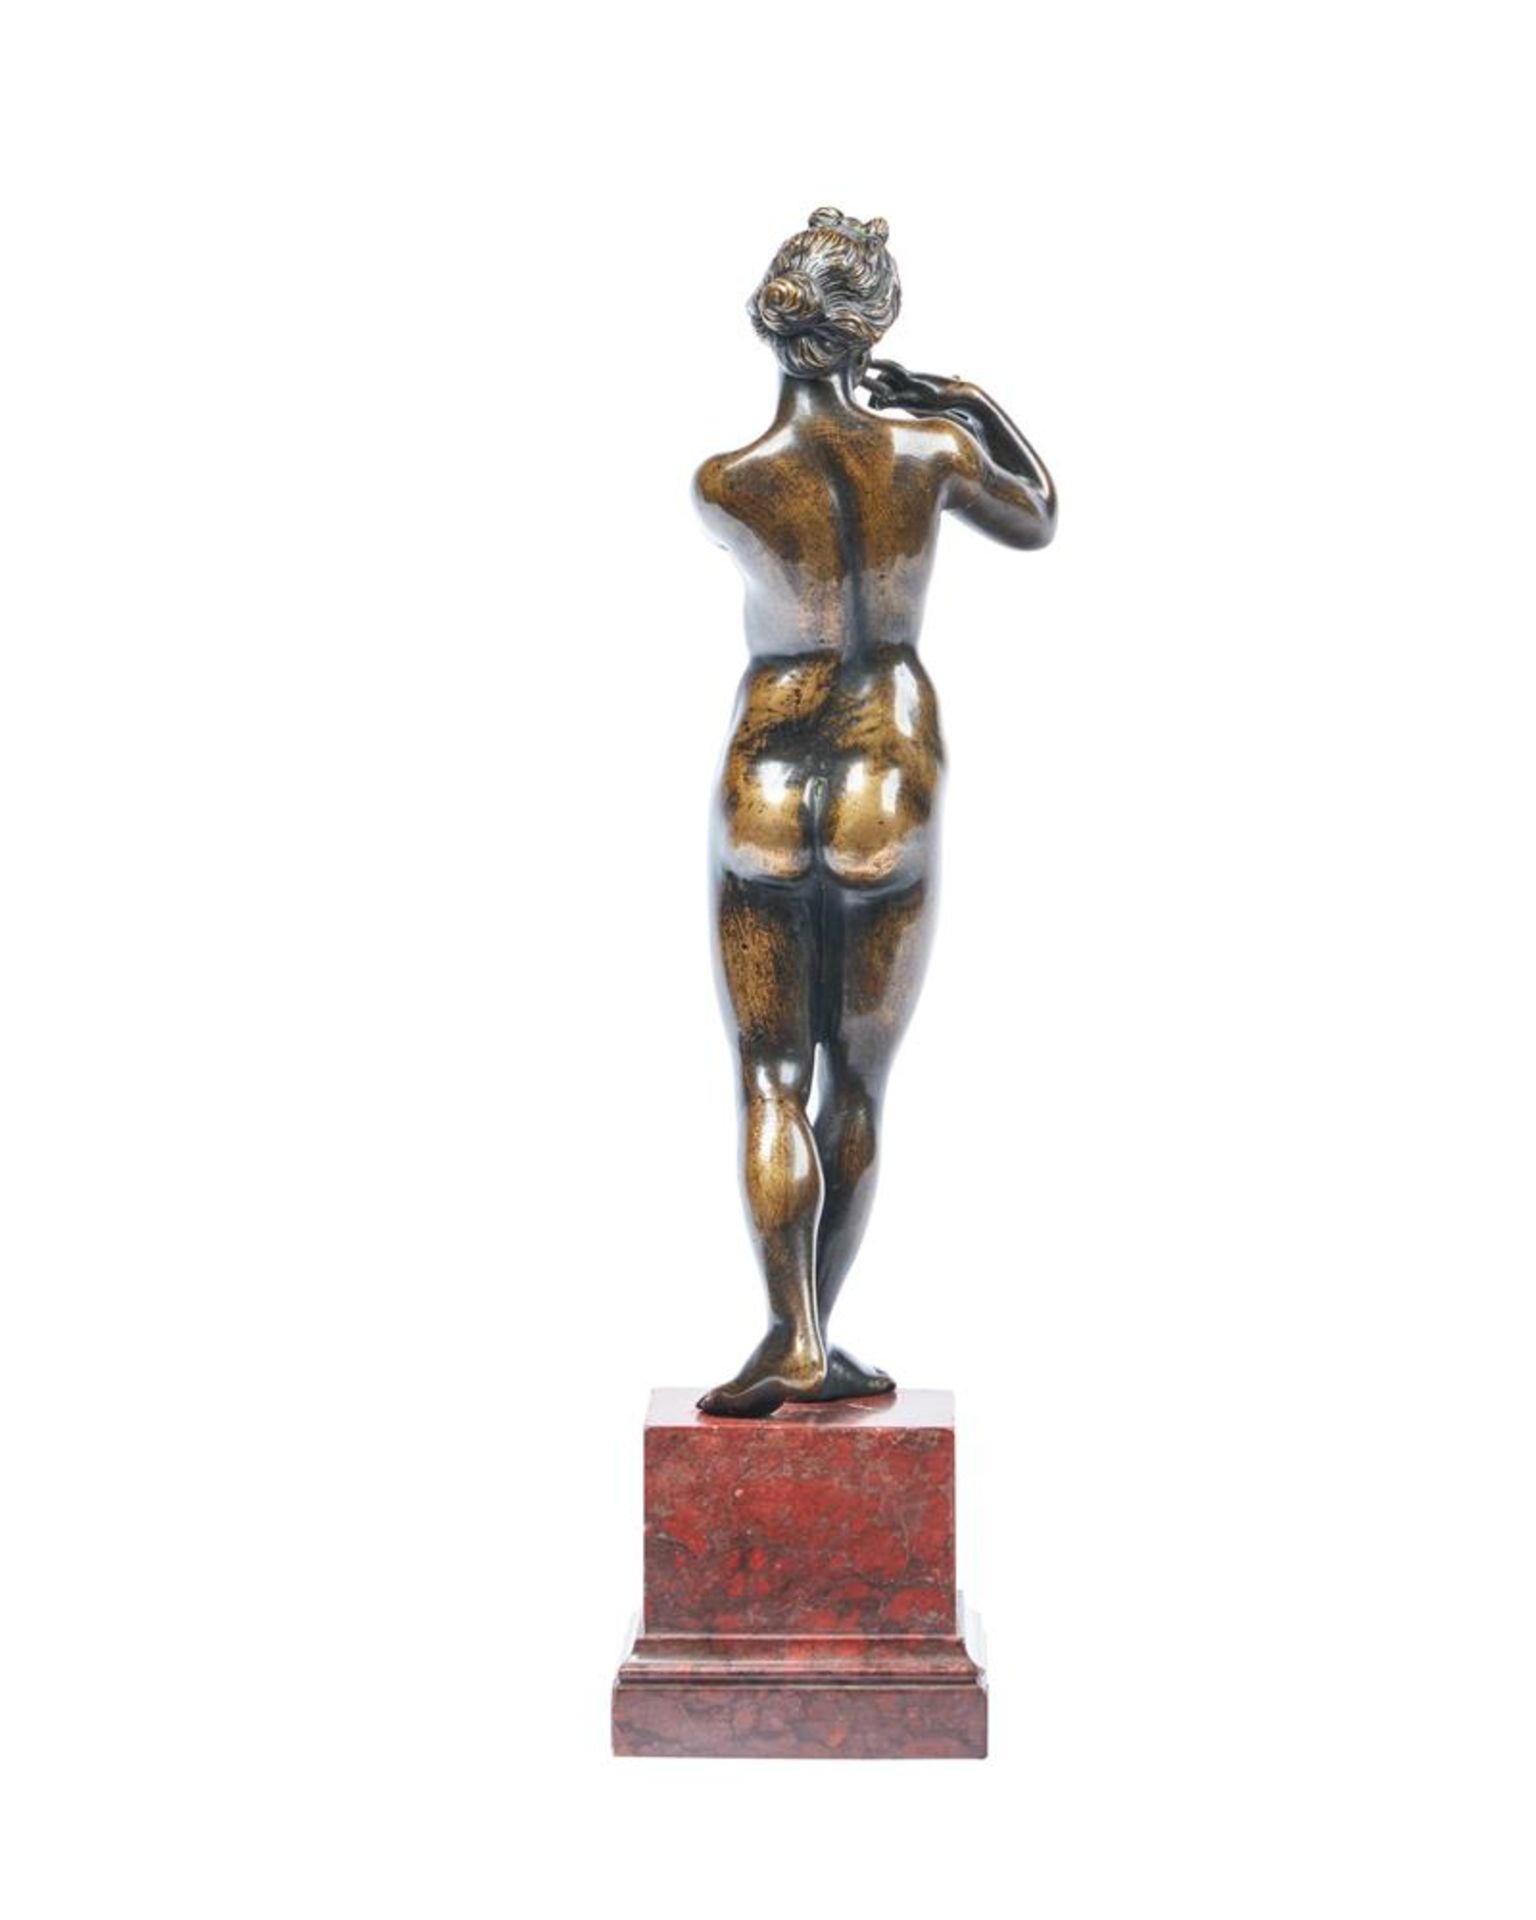 A FRENCH BRONZE FIGURE OF A FEMALE FLAUTIST, 18TH CENTURY - Image 4 of 5